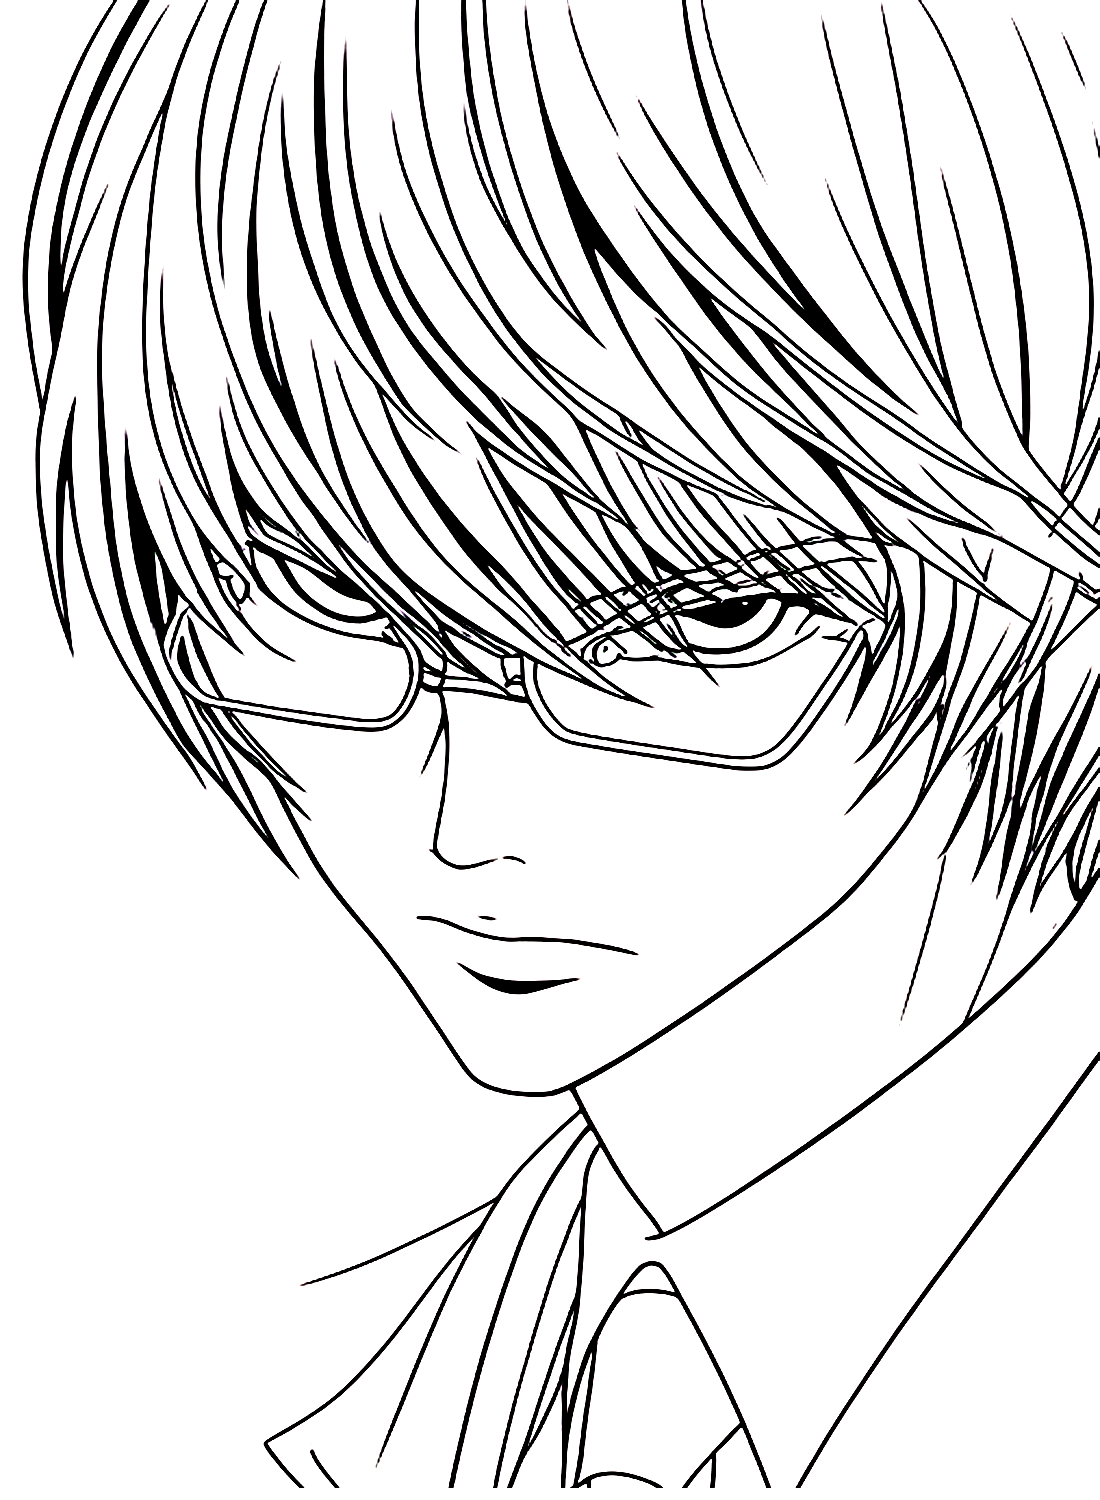 Yagami Light wearing Glasses from Yagami Light